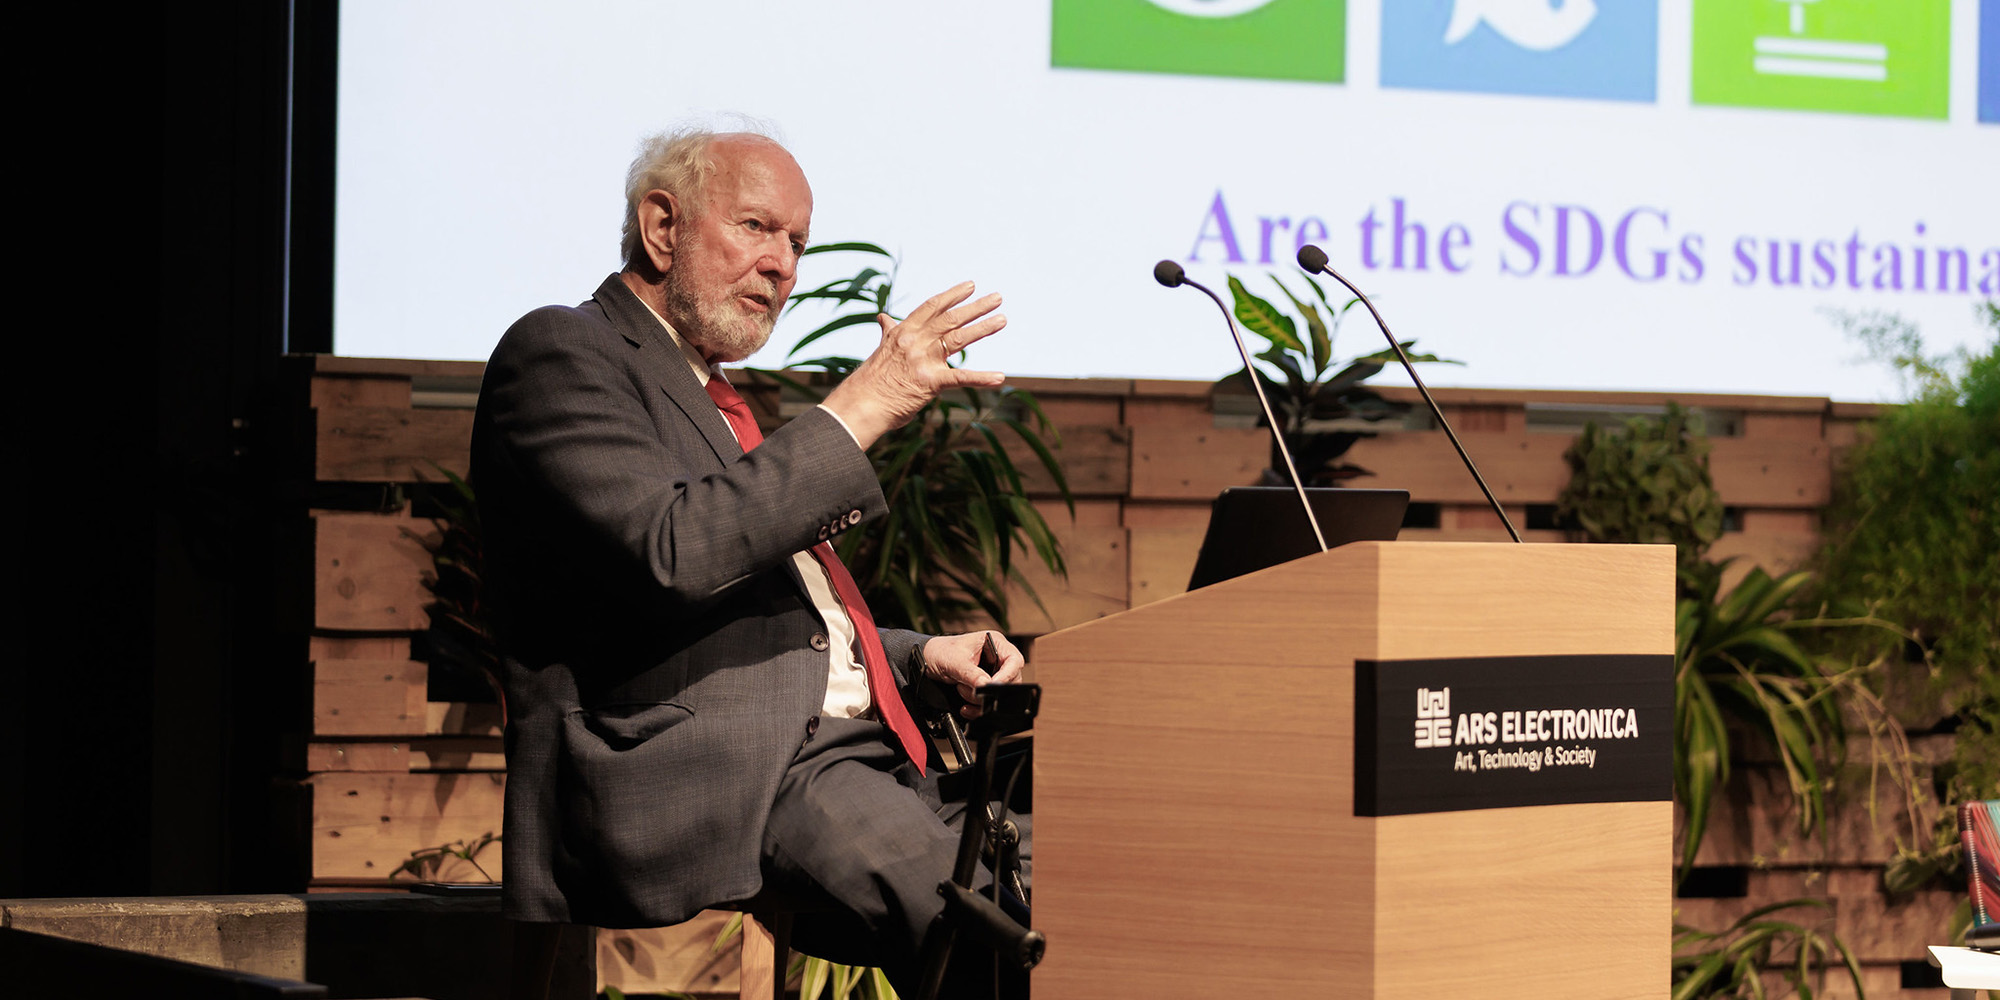 In his keynote “From the Limits of Growth to Wellbeing for All within Planetary Boundaries”, Ernst Ulrich von Weizsäcker (DE) spoke about the new report of Club of Rome: A survival guide to save humanity from ecological and social catastrophe.